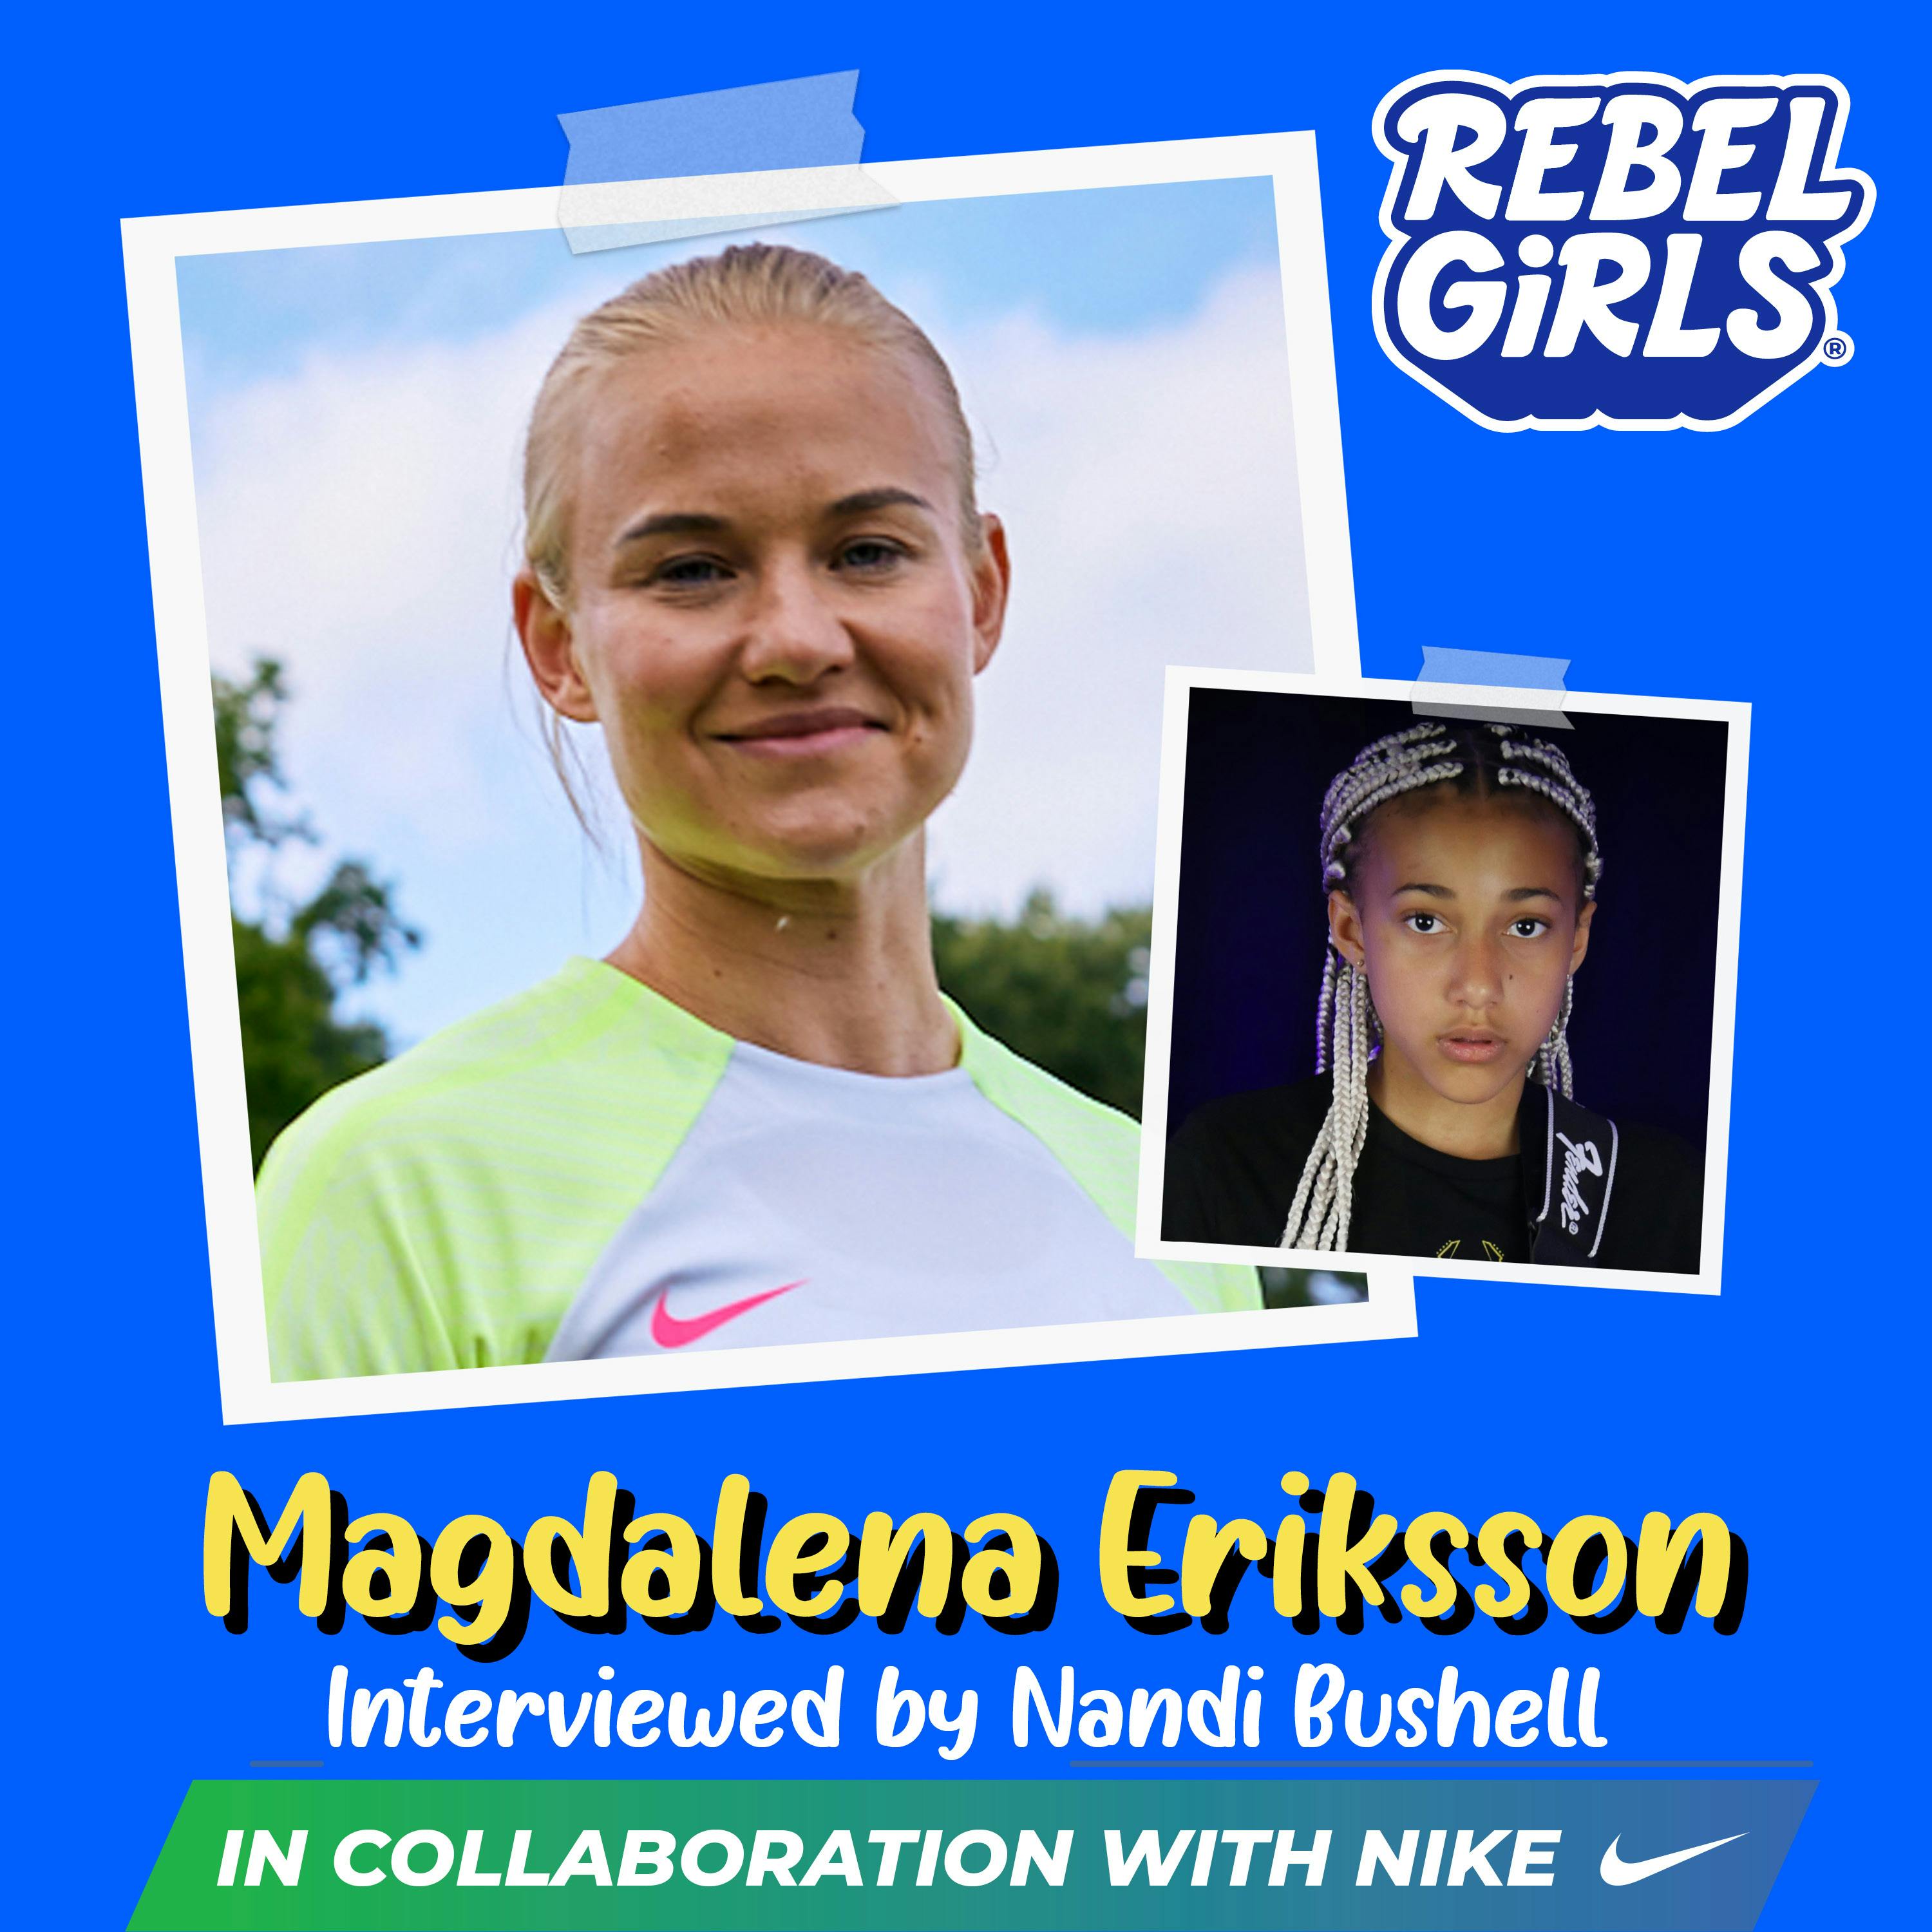 Get to Know Magdalena Eriksson